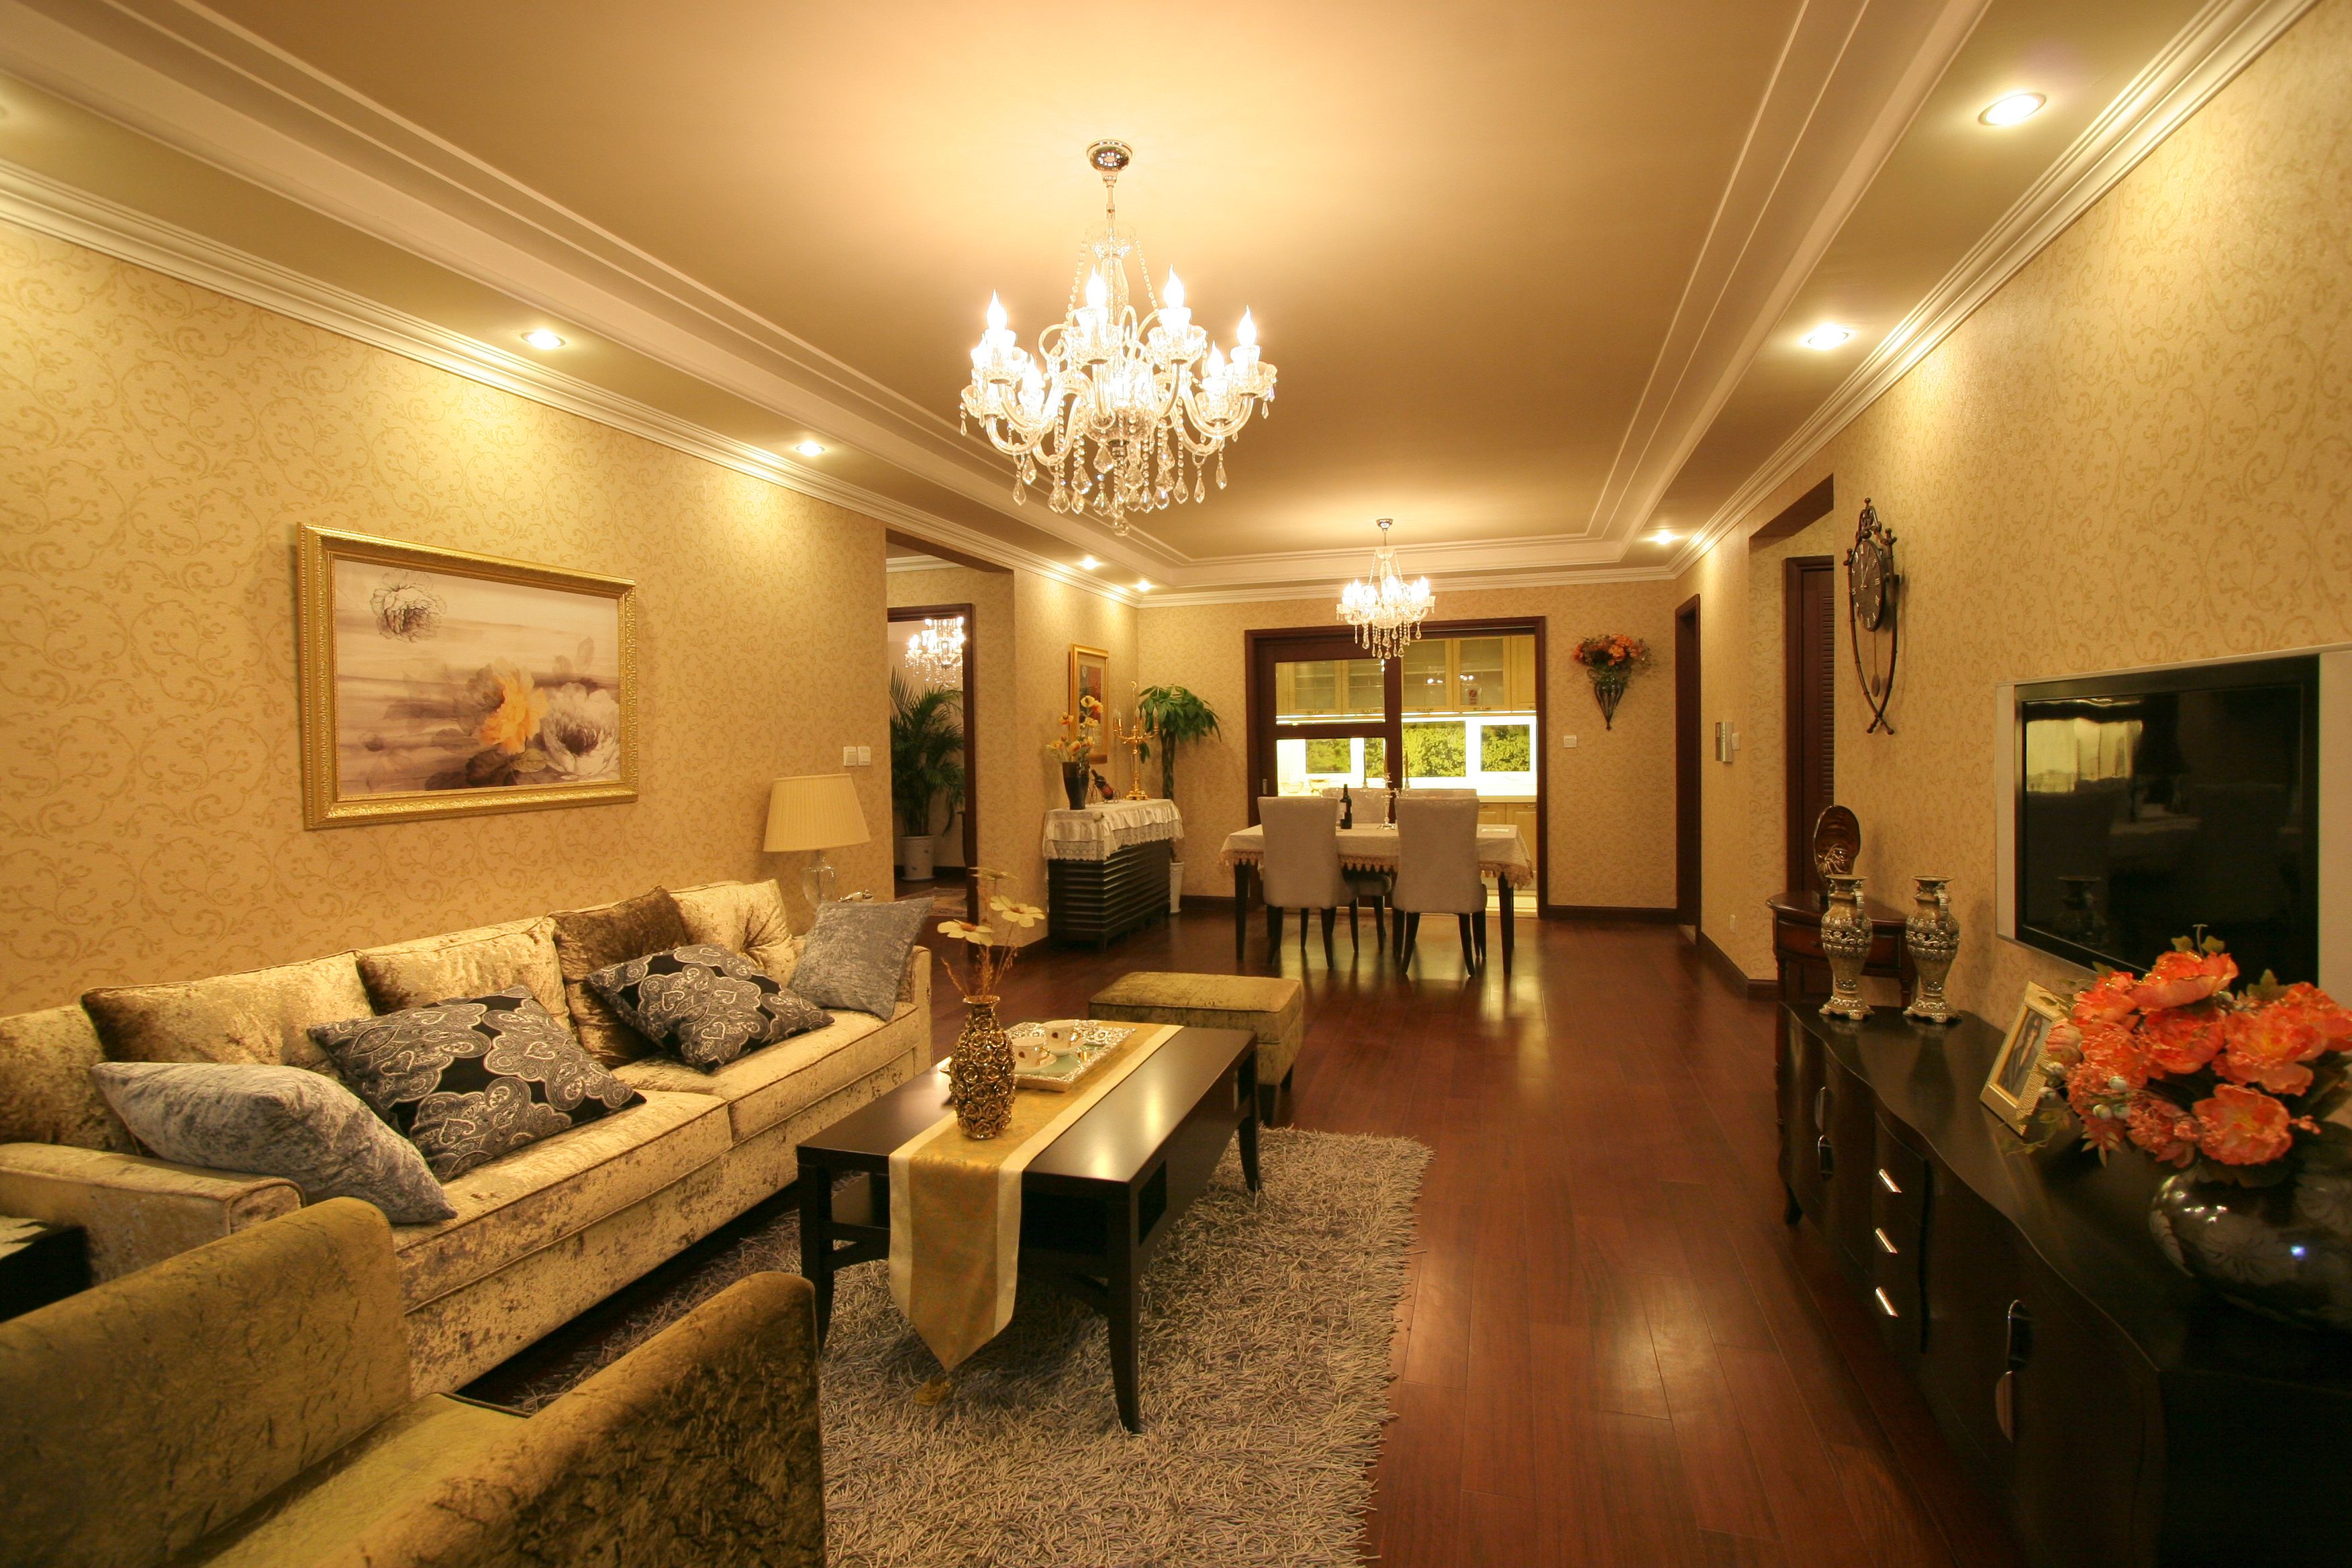 How To Get The Lighting For Your Home Right Best Travel throughout House Lighting India